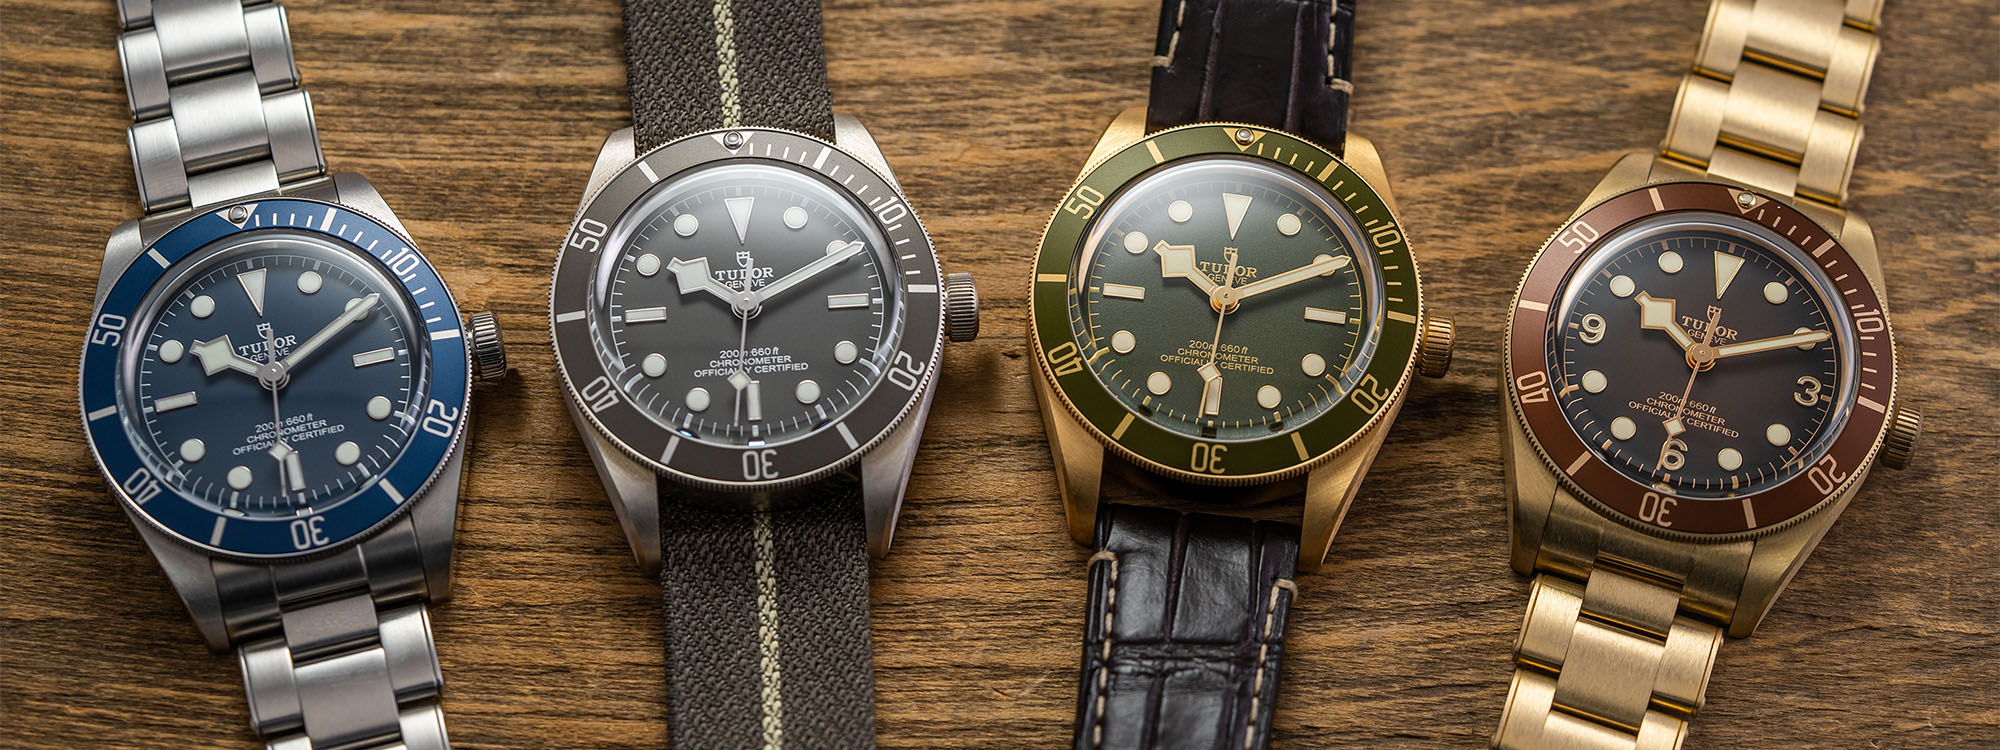 Tudor Black Bay Fifty Eight: Our Guide to All the Watches